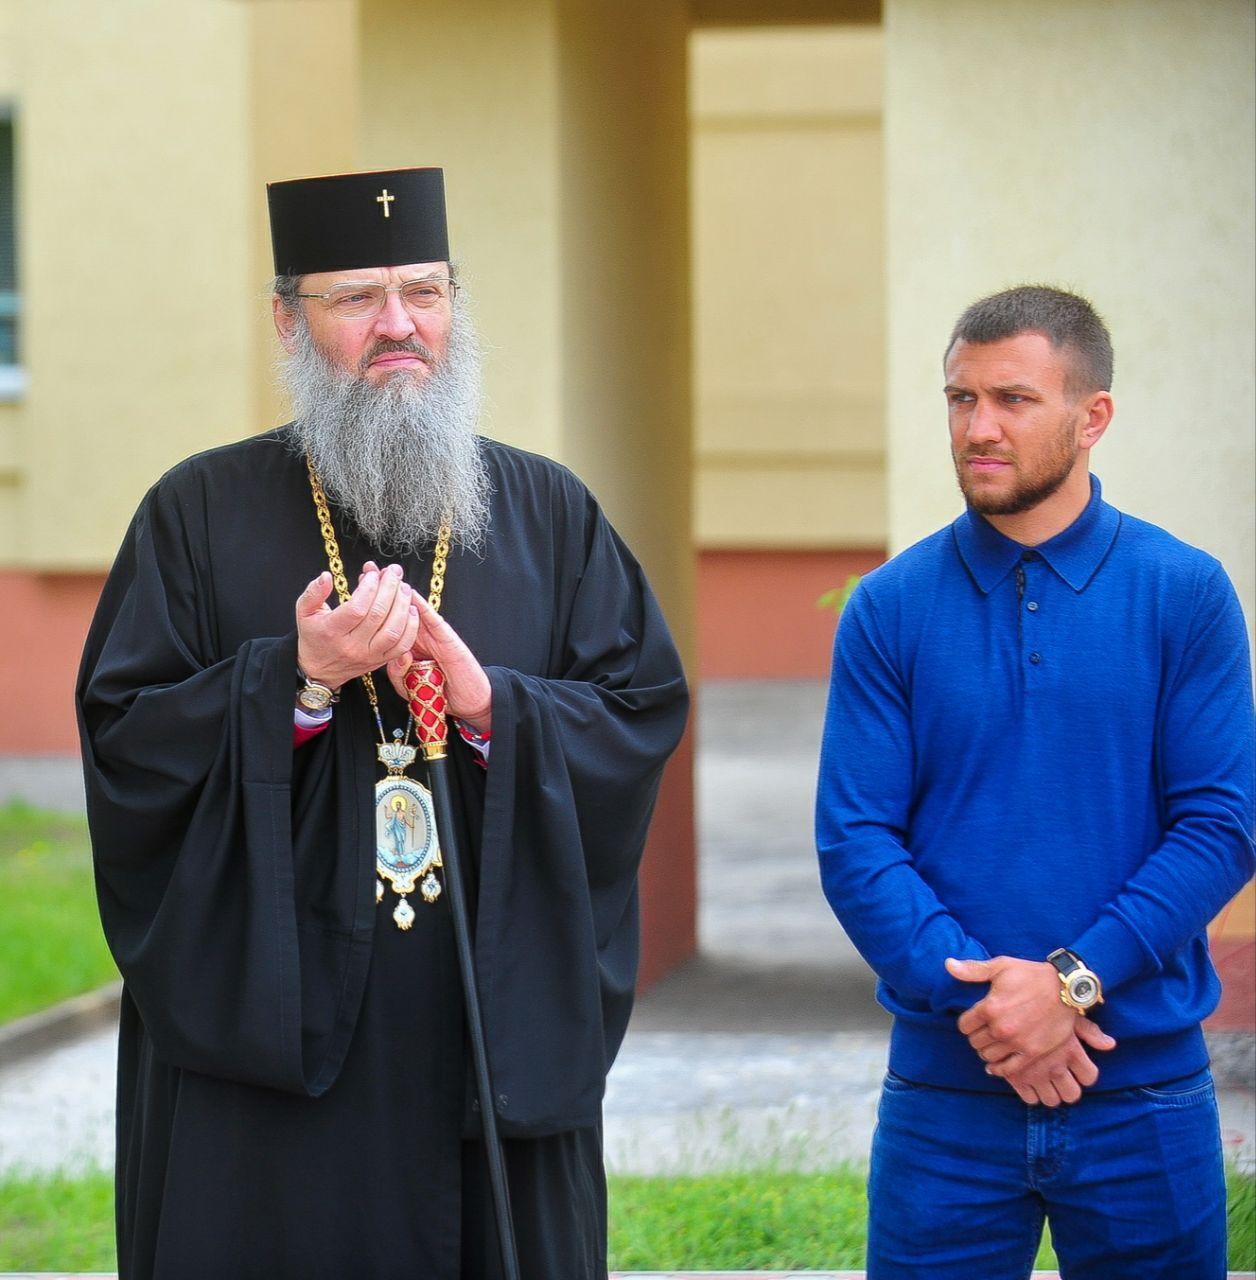 ''I see strength'': Lomachenko praised Metropolitan Onufriy, who was found to have a Russian passport